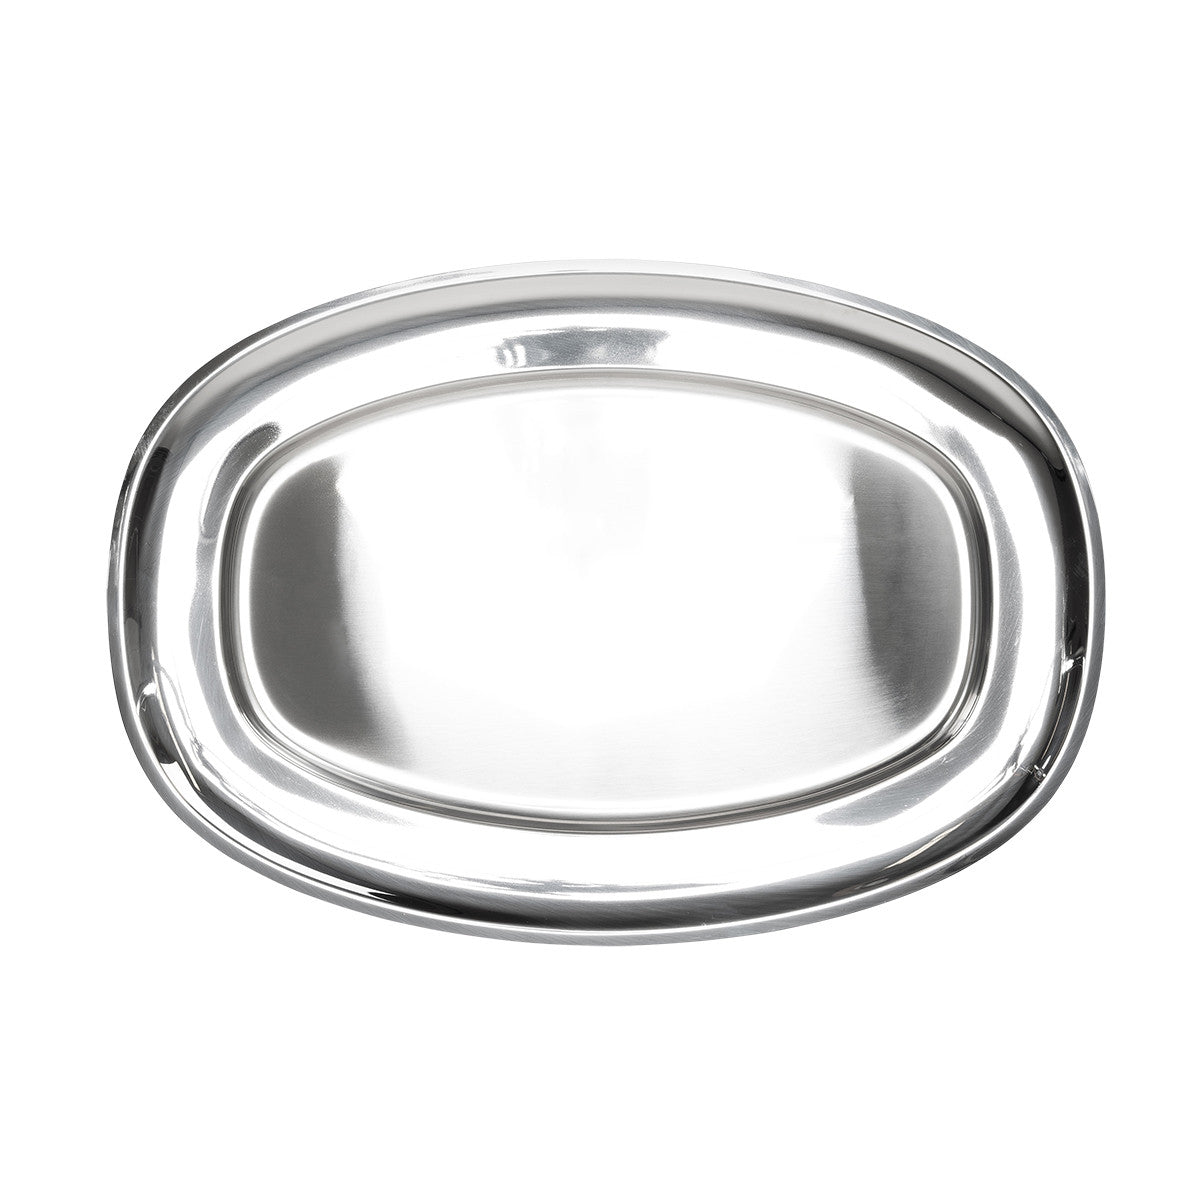 SERVING TRAY 52x37 cm, STAINLESS STEEL